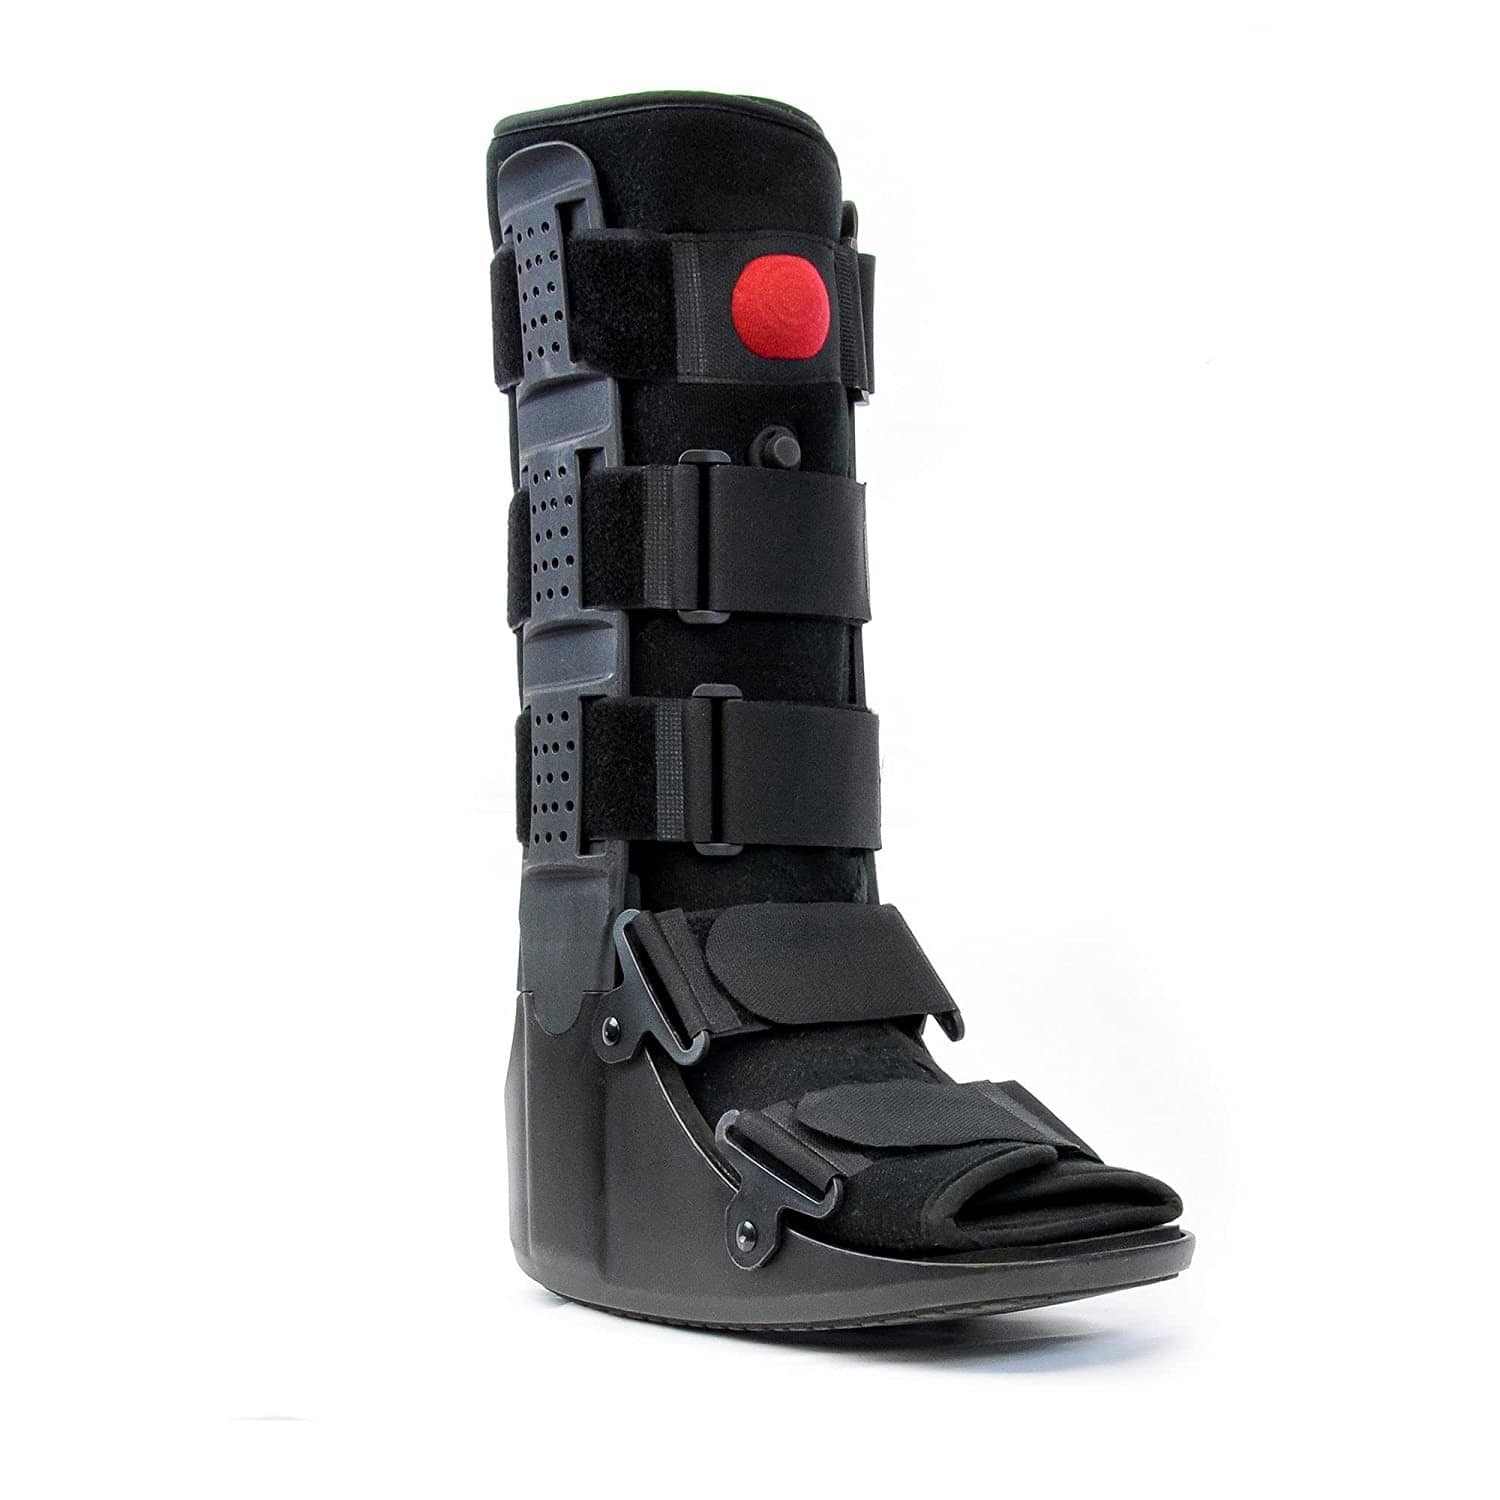 Tall cam walker boot used for posterior tibial tendonitis and fractures.